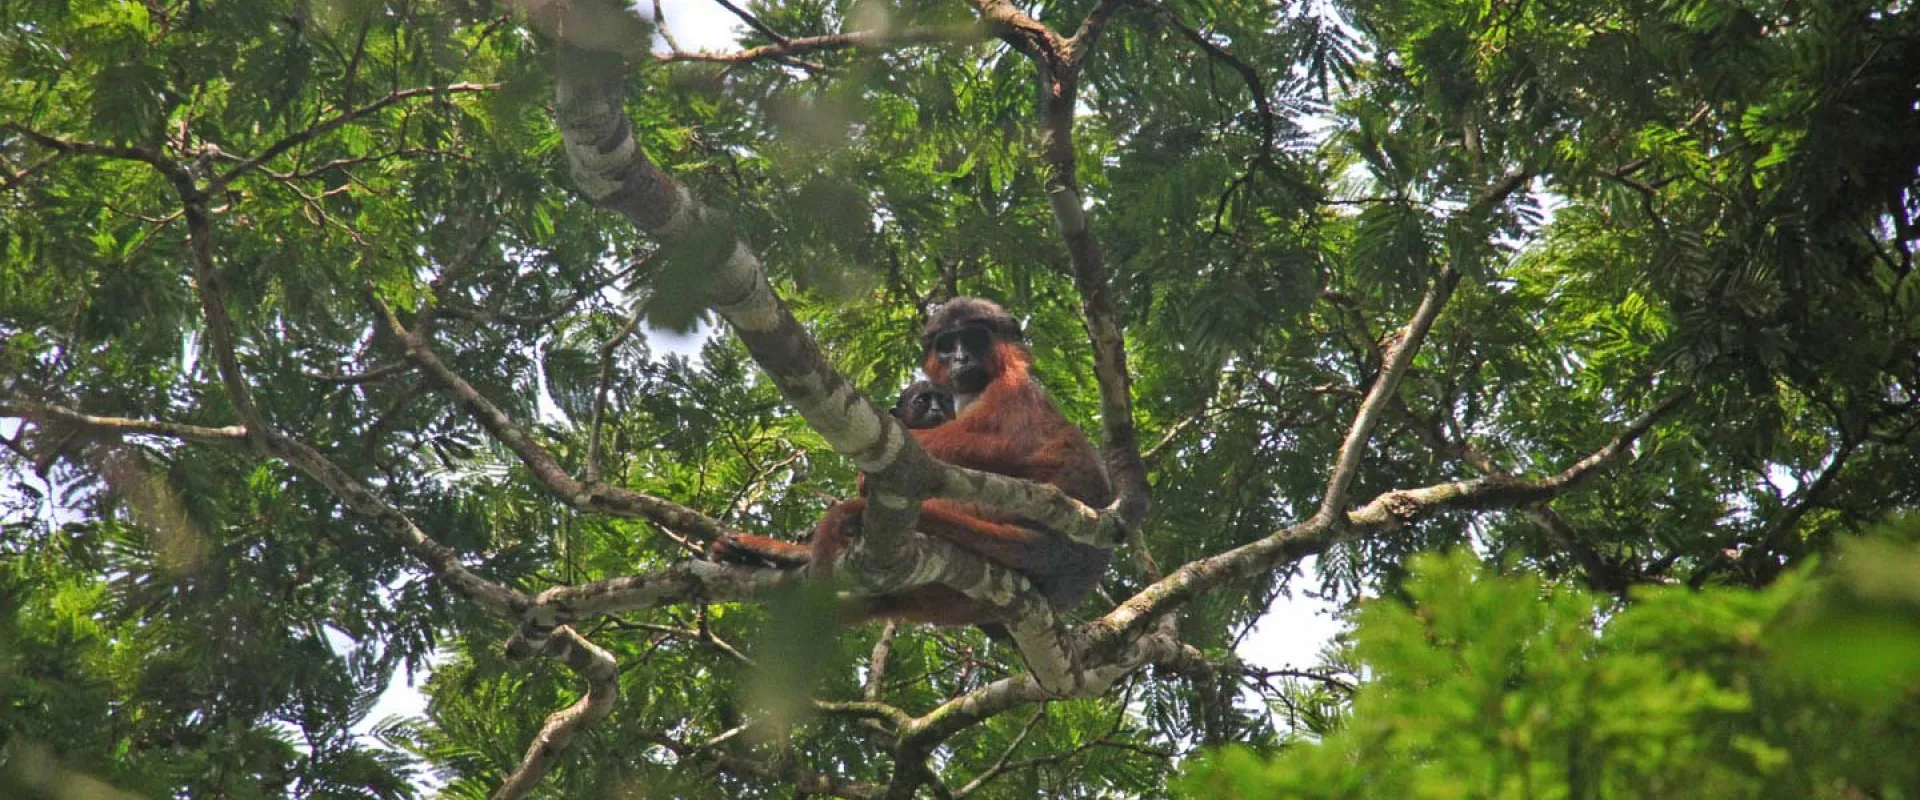 On the Frontlines: Protecting Preuss's Red Colobus Monkey in Nigeria 